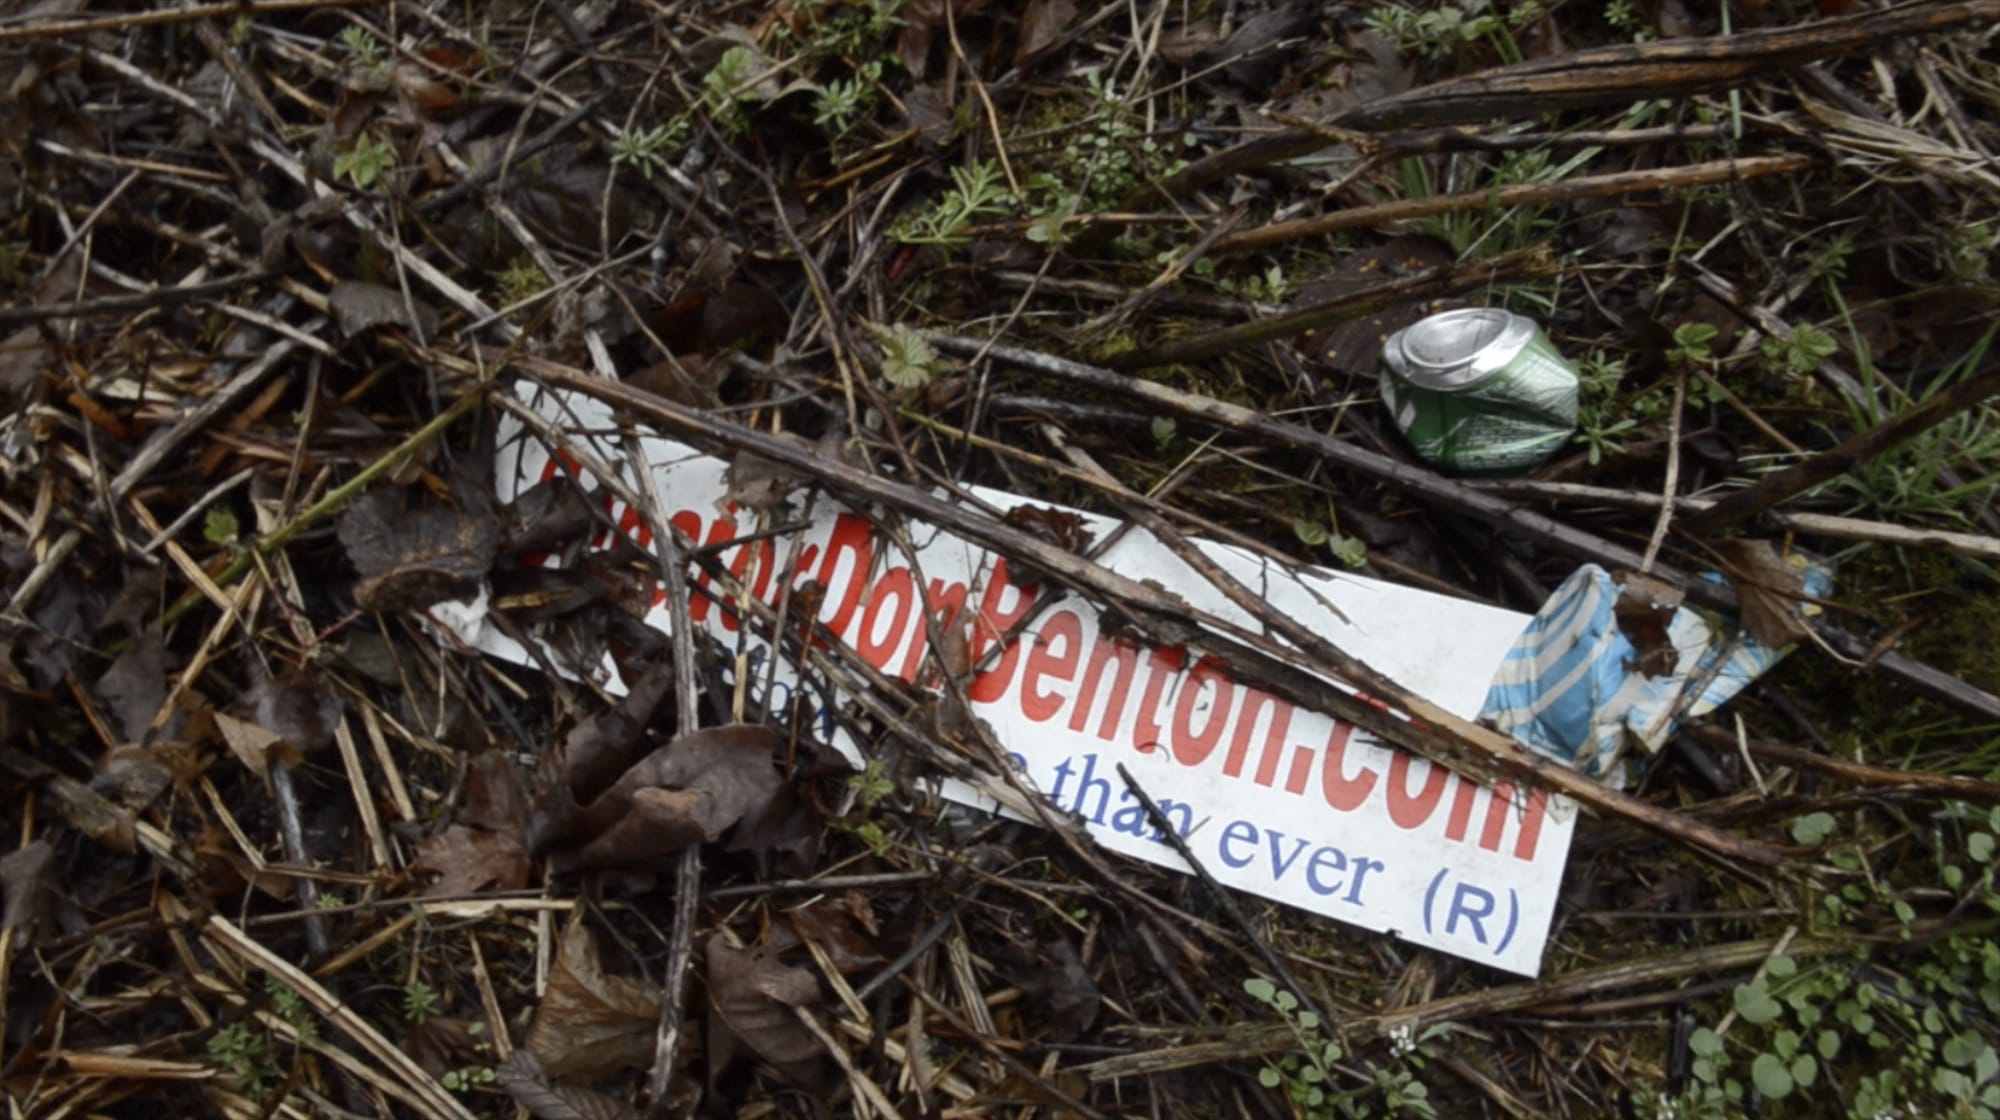 No Columbian litter was found, but Benton litter was discovered.